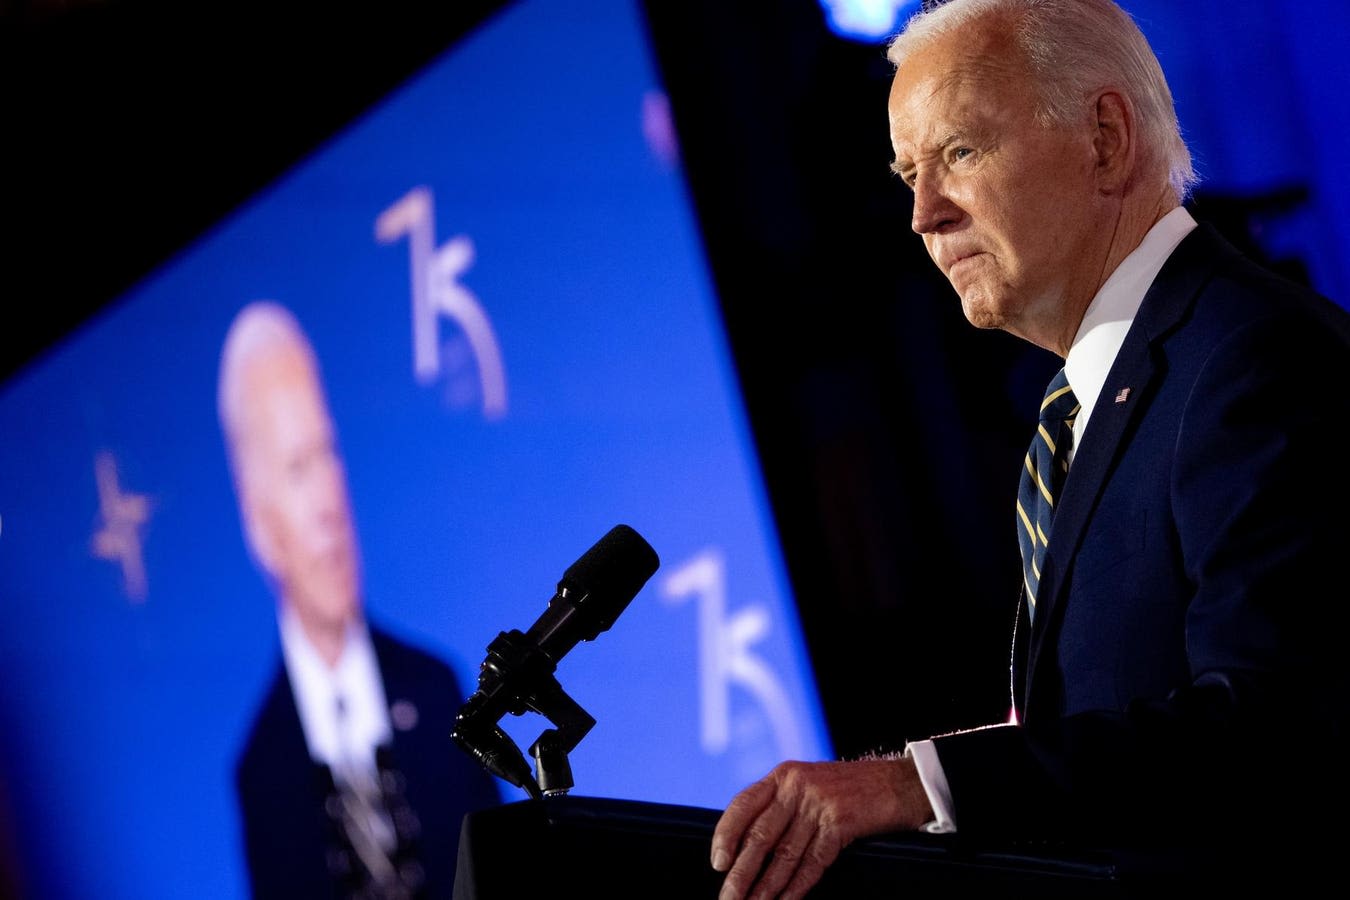 Here’s How Democrats Could Pick A New Nominee As Joe Biden Drops Out